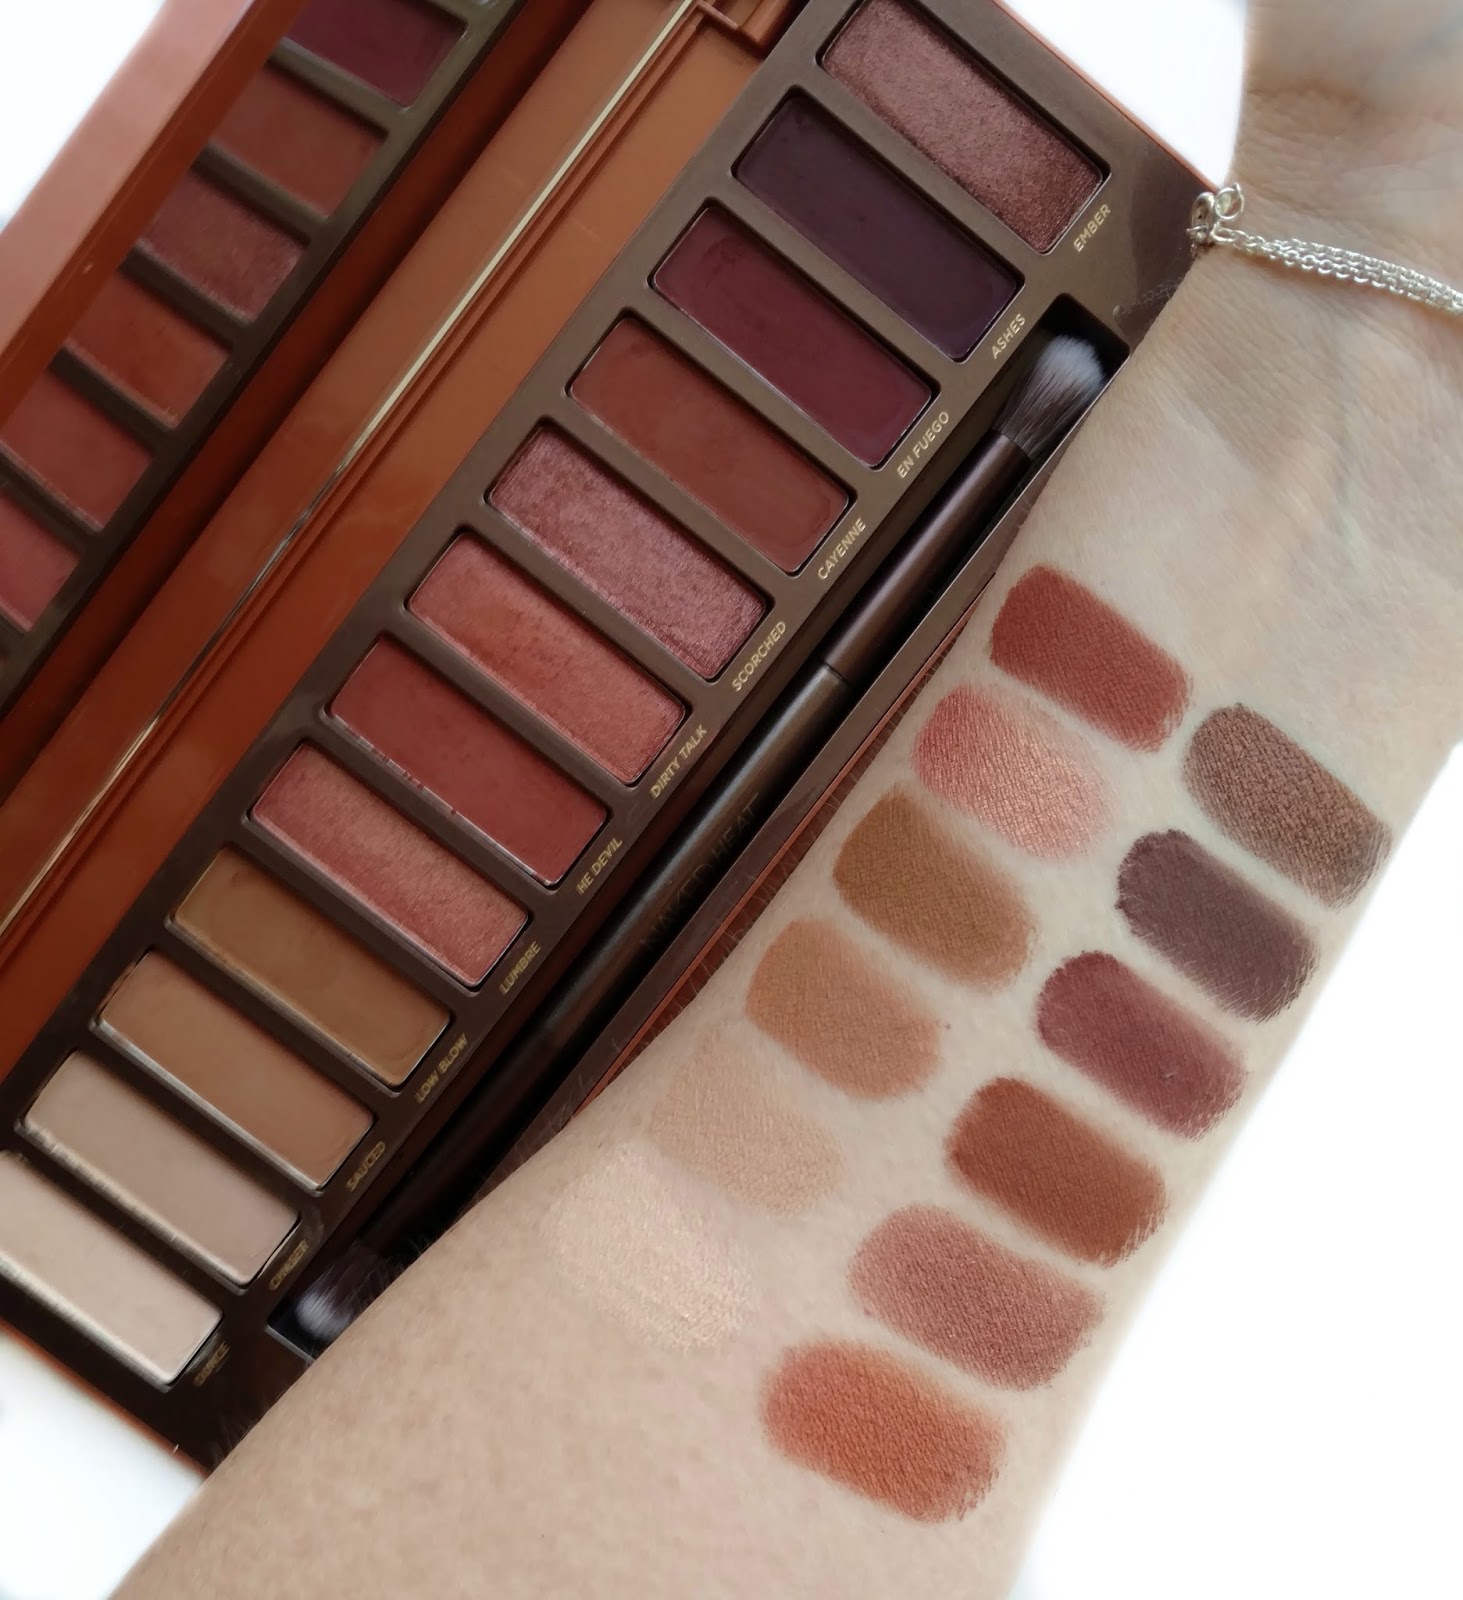 urban decay naked heat swatches